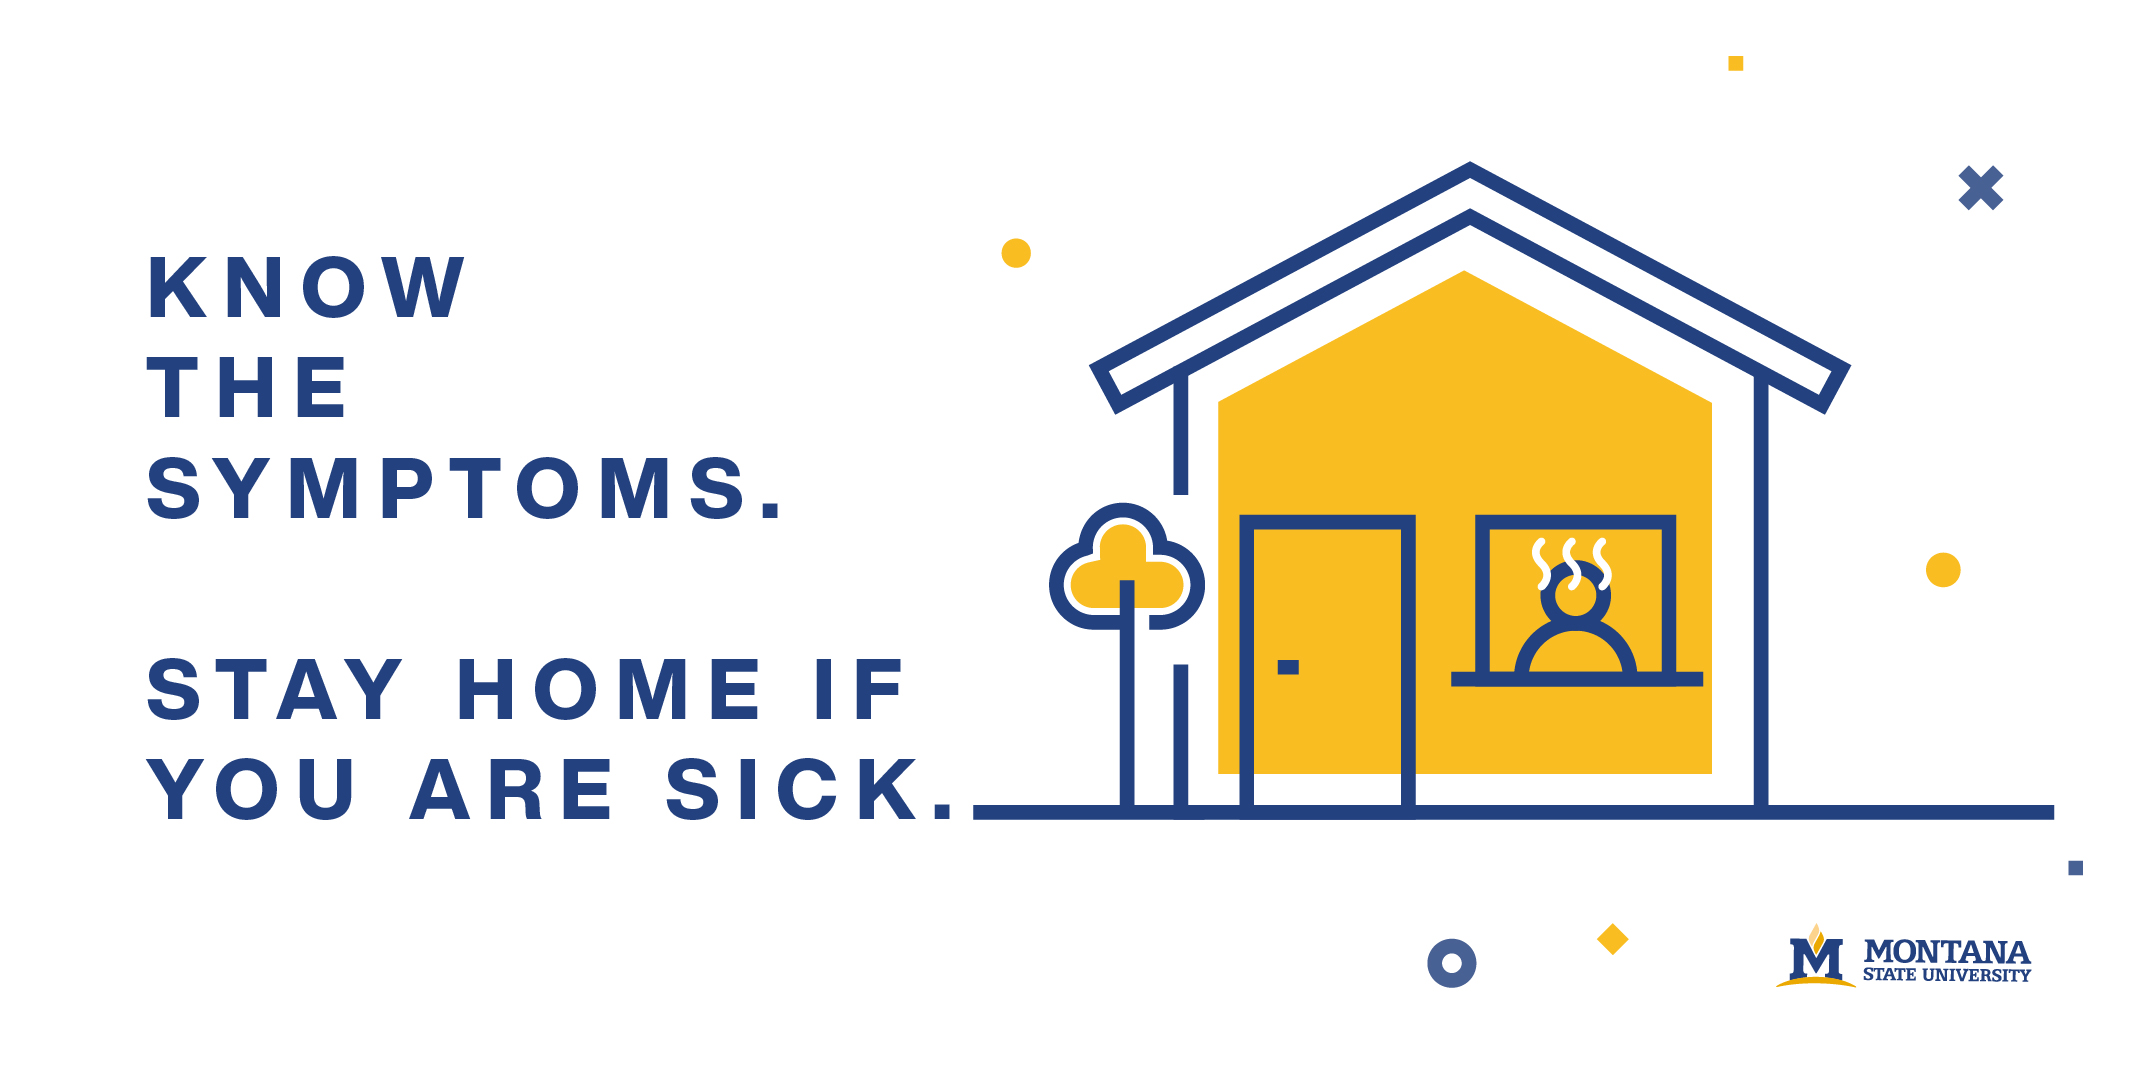 Know the symptoms. Stay home when sick.